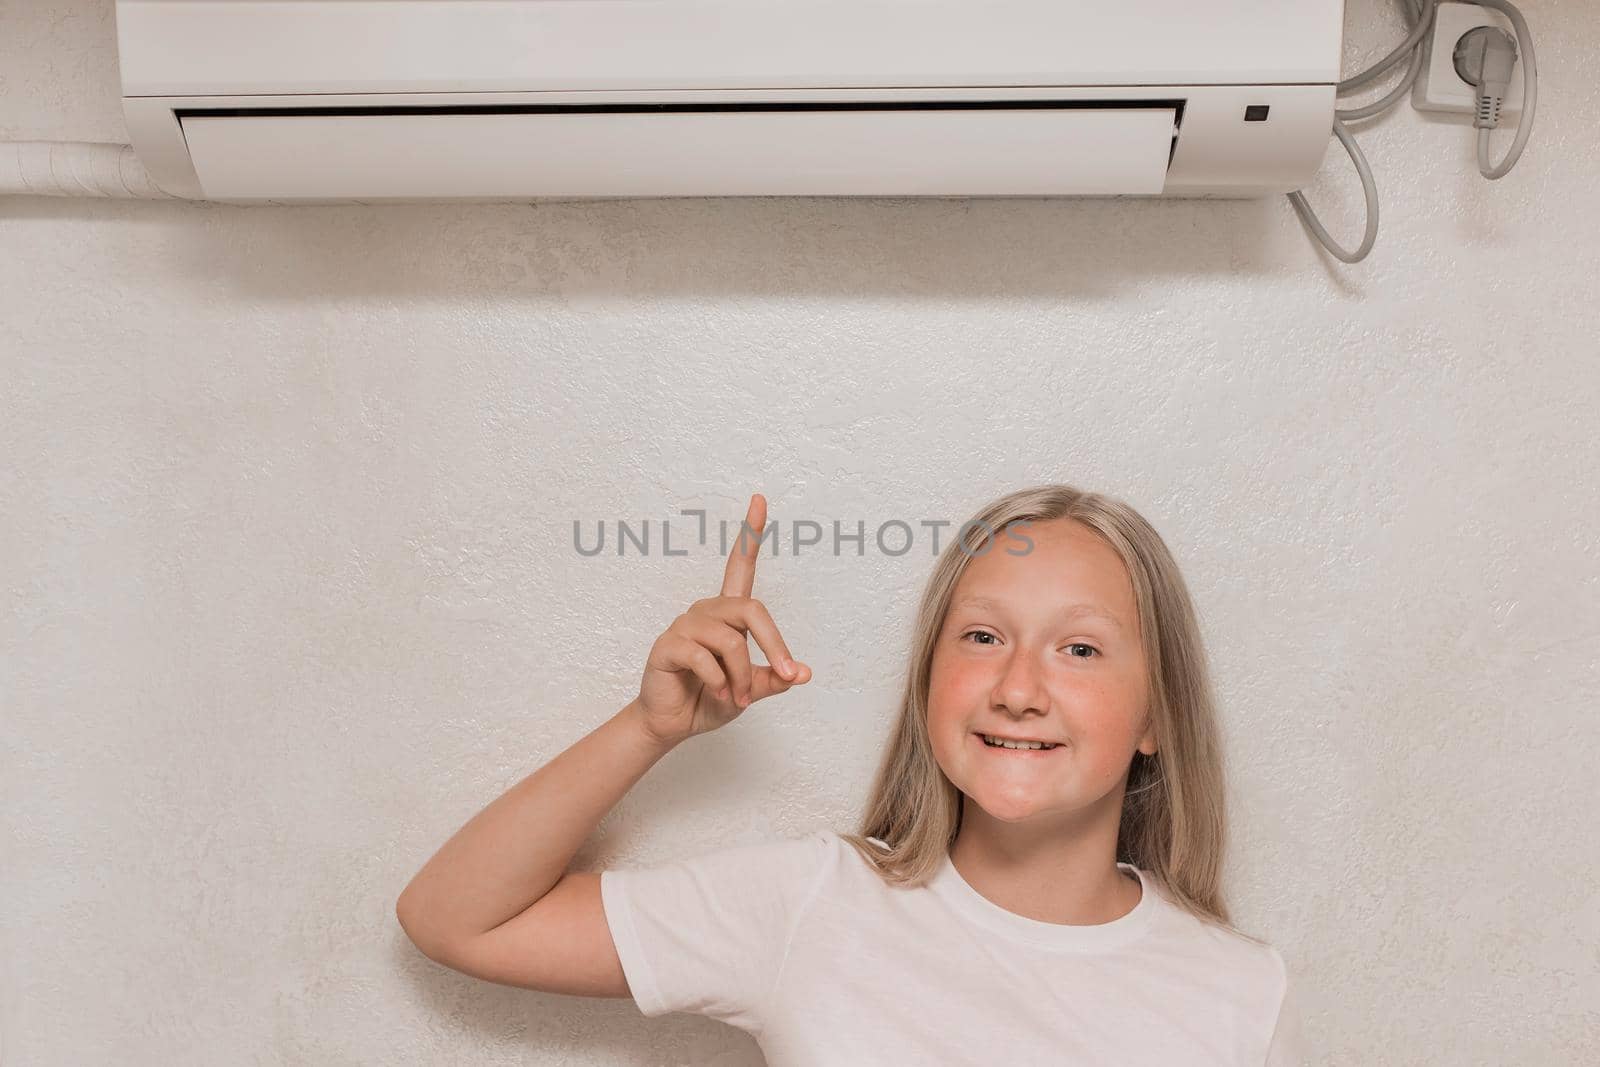 Cute teenage girl blonde European appearance points a hand finger at the air conditioner on the wall in the room by AYDO8